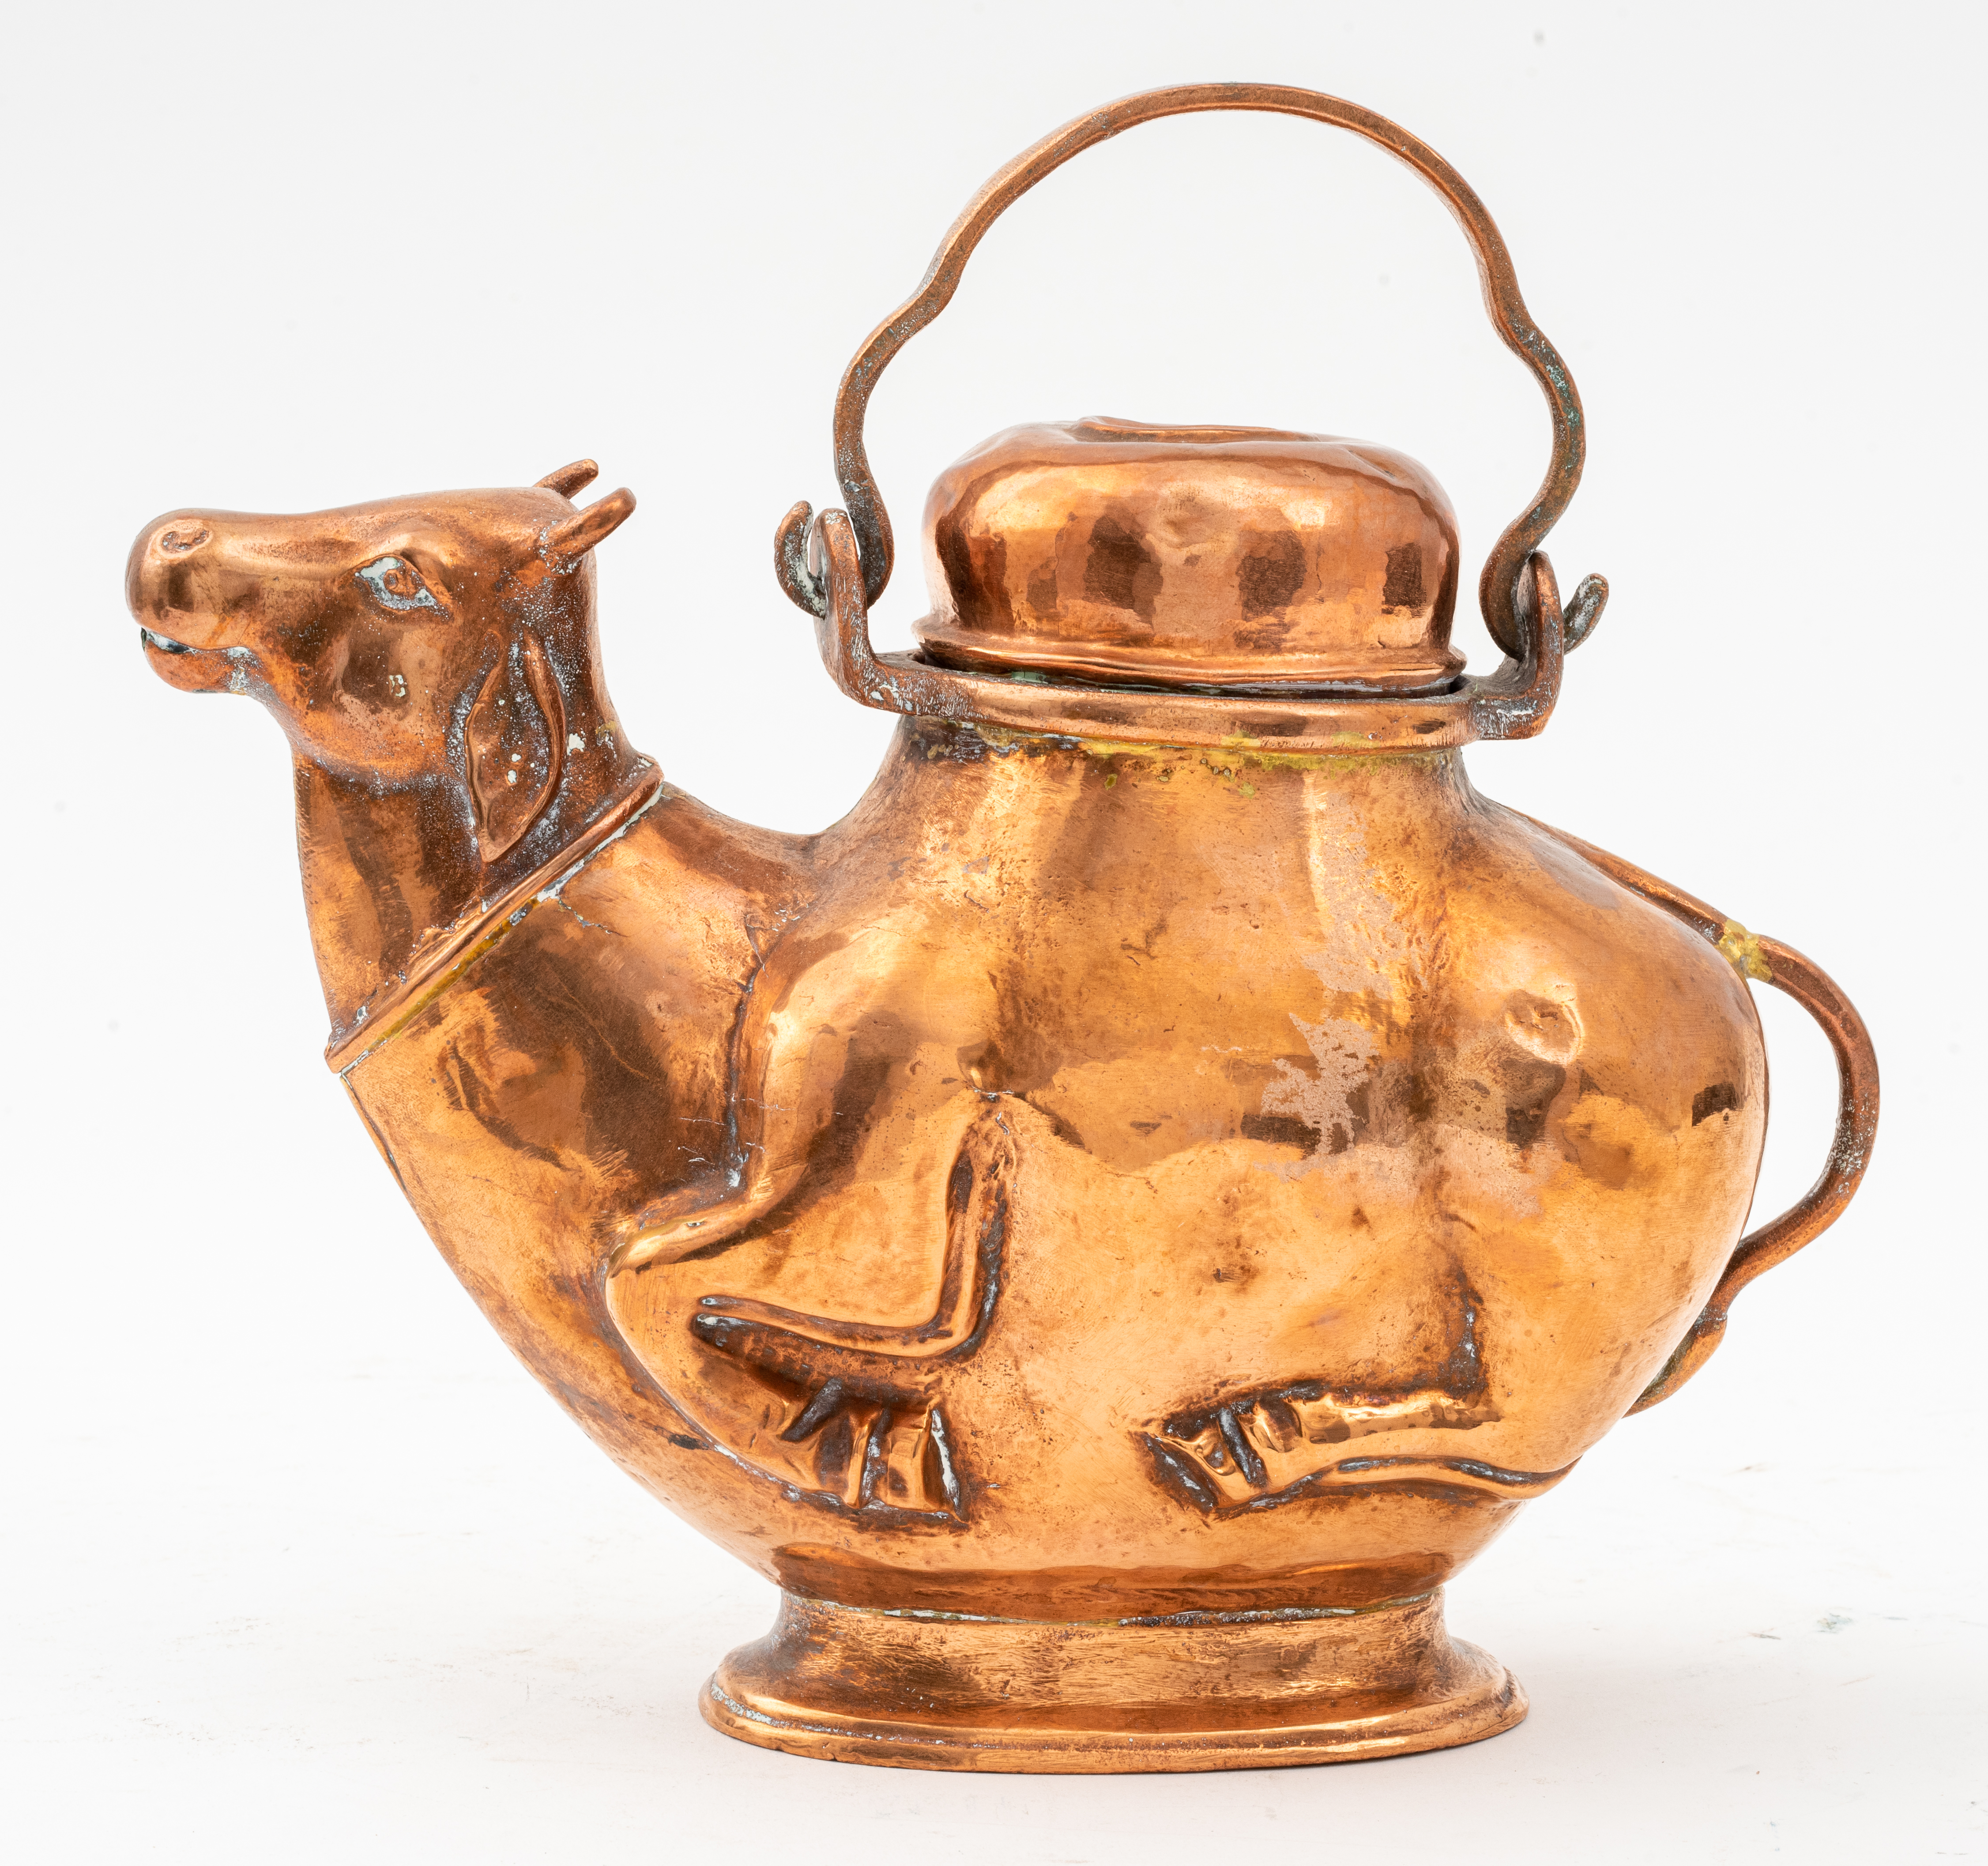 COW-SHAPED COPPER COFFEE POT Cow-shaped